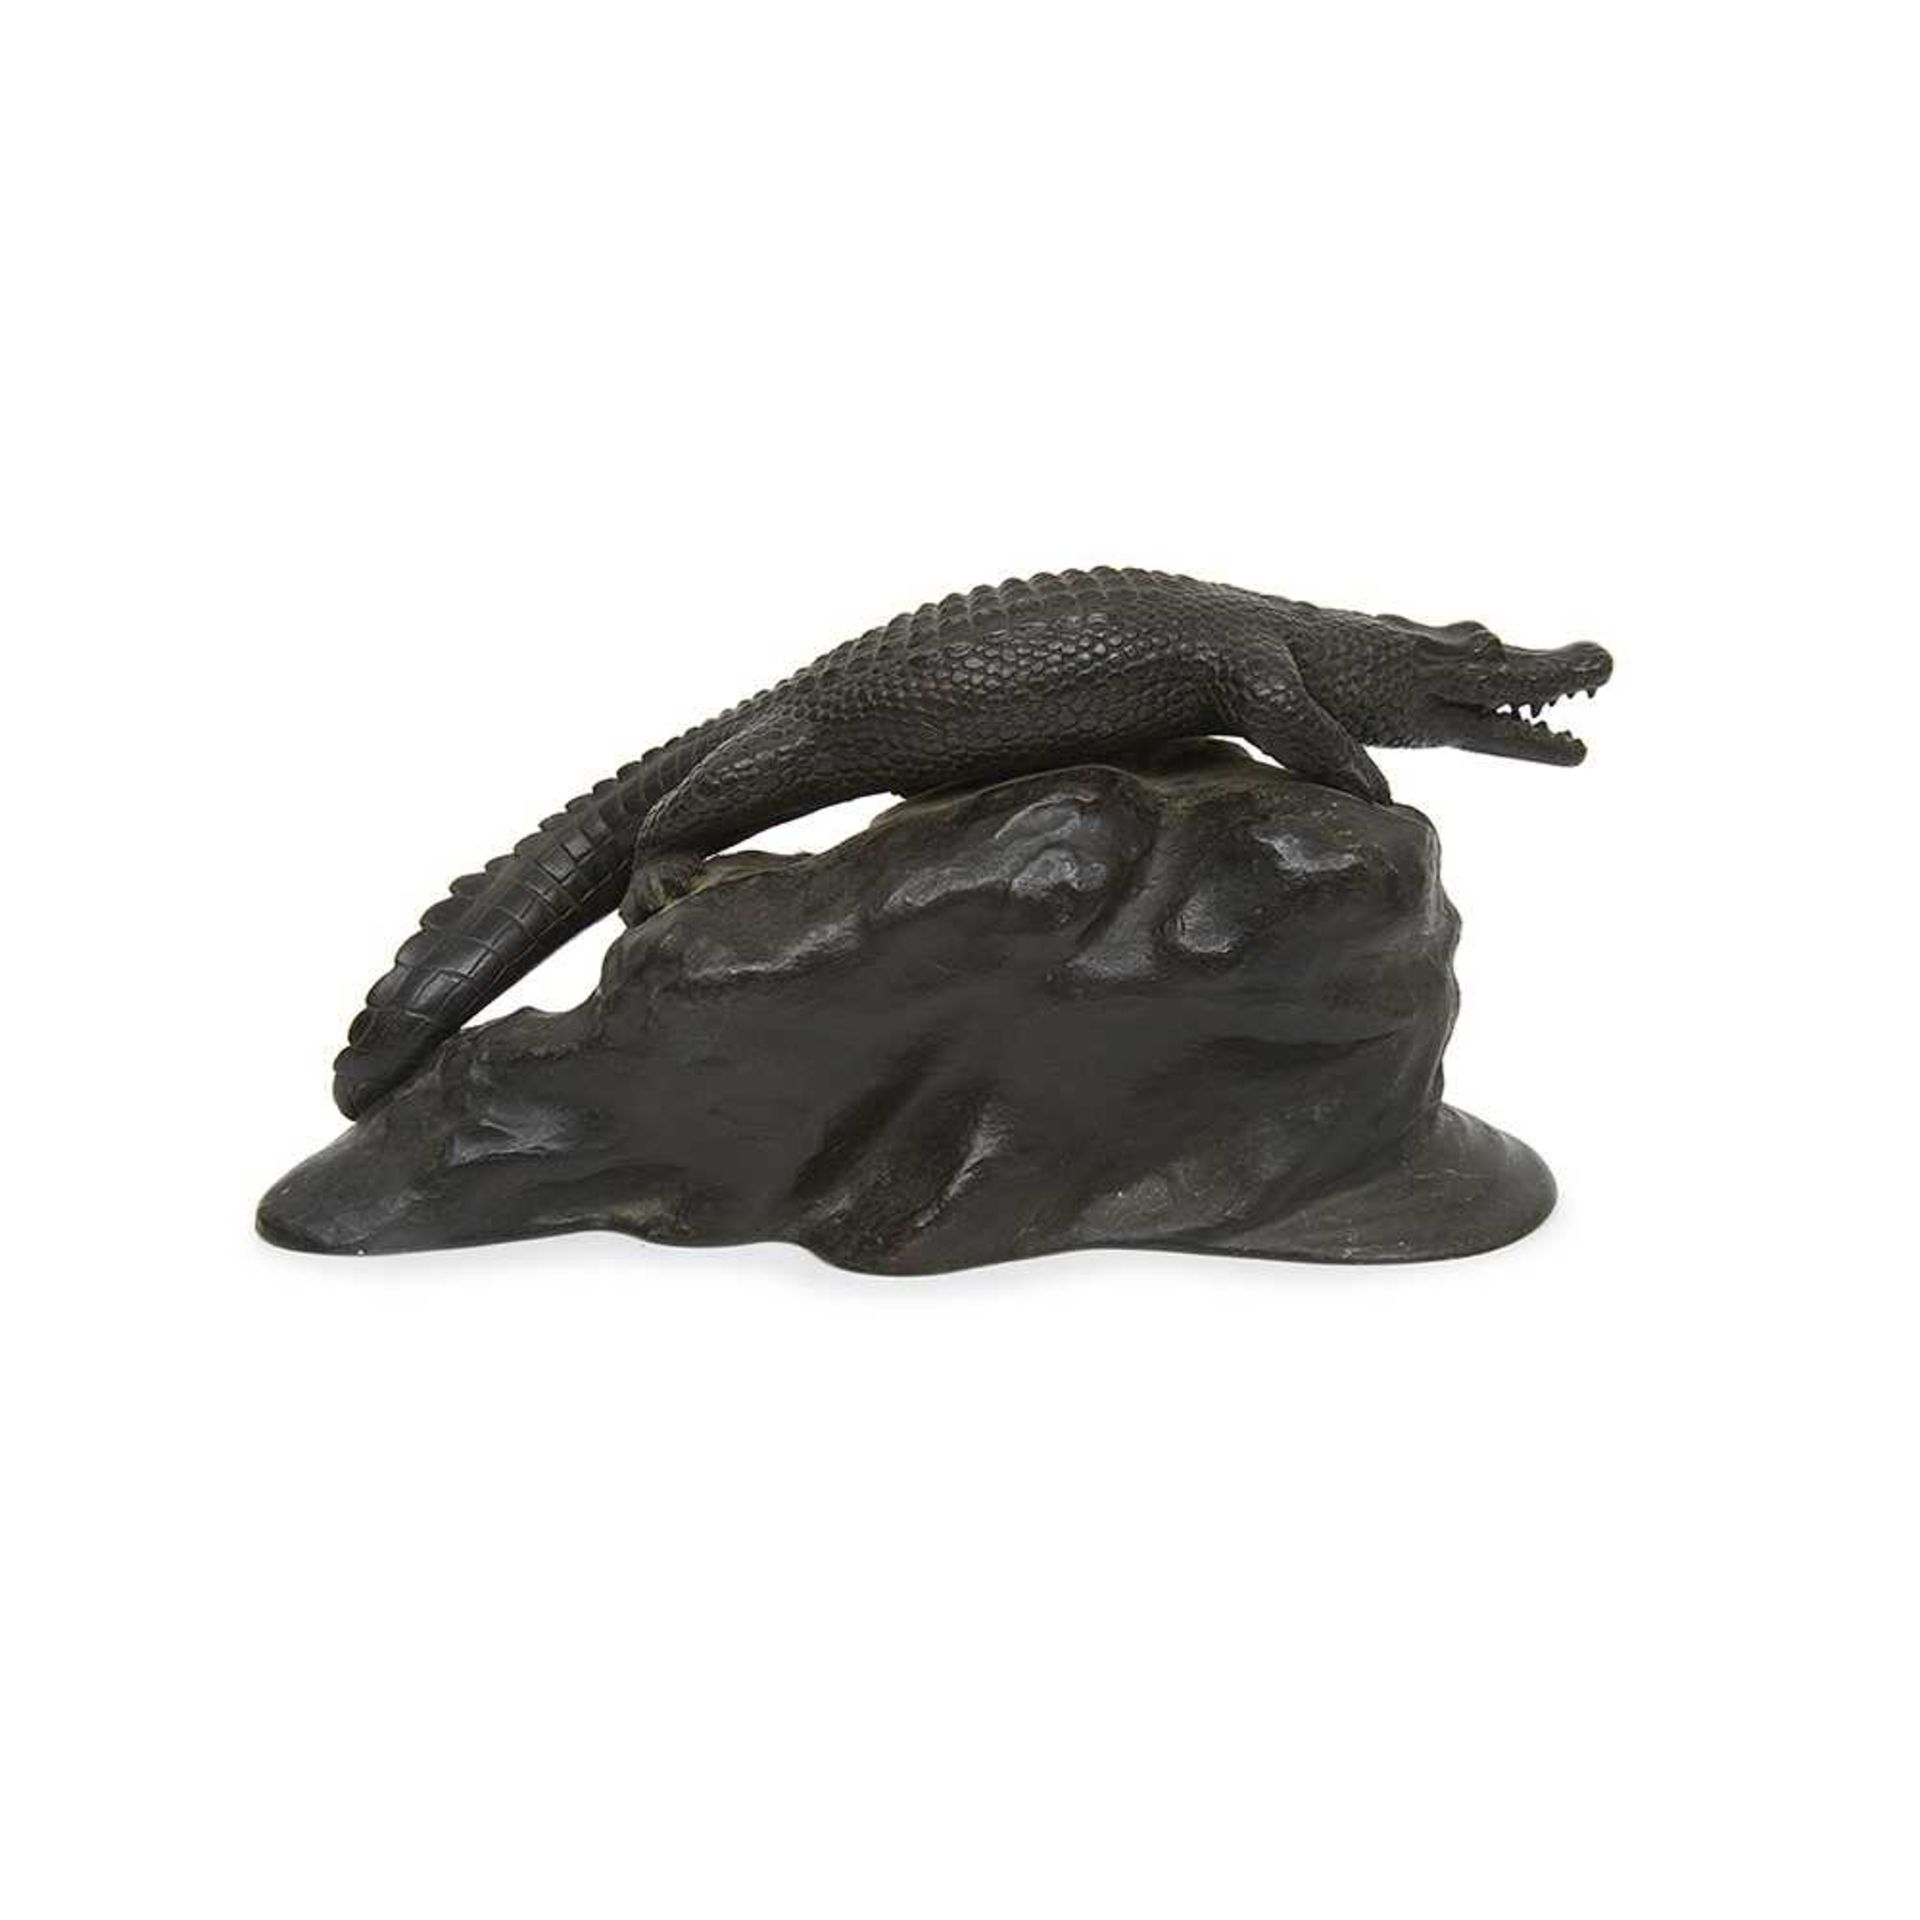 A 19TH CENTURY FRENCH BRONZE MODEL OF AN ALLIGATOR - Image 2 of 2